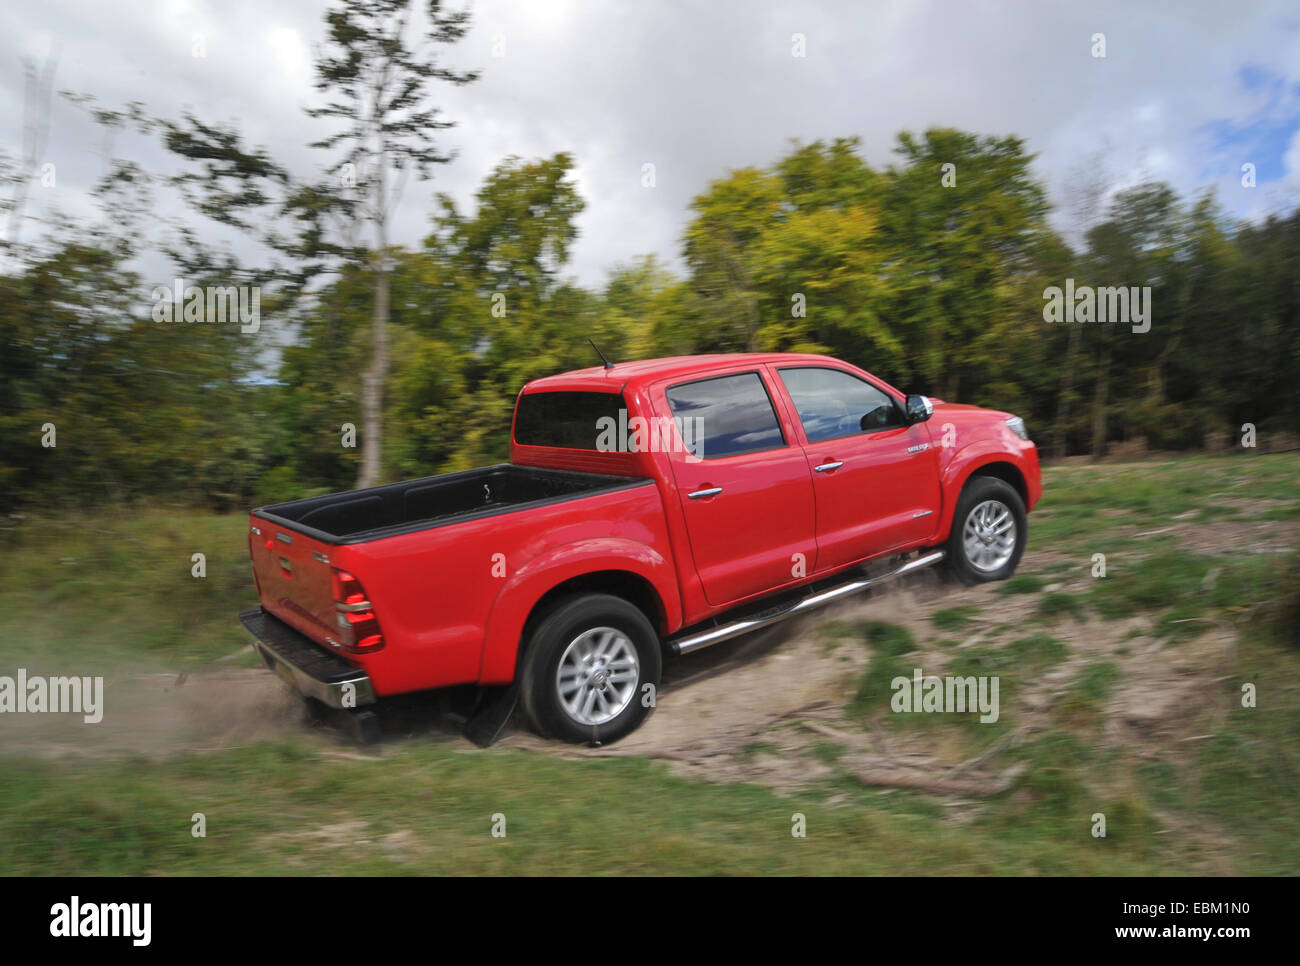 2012 Toyota Hilux Invincible 4 wheel drive pick up truck driving off road Stock Photo